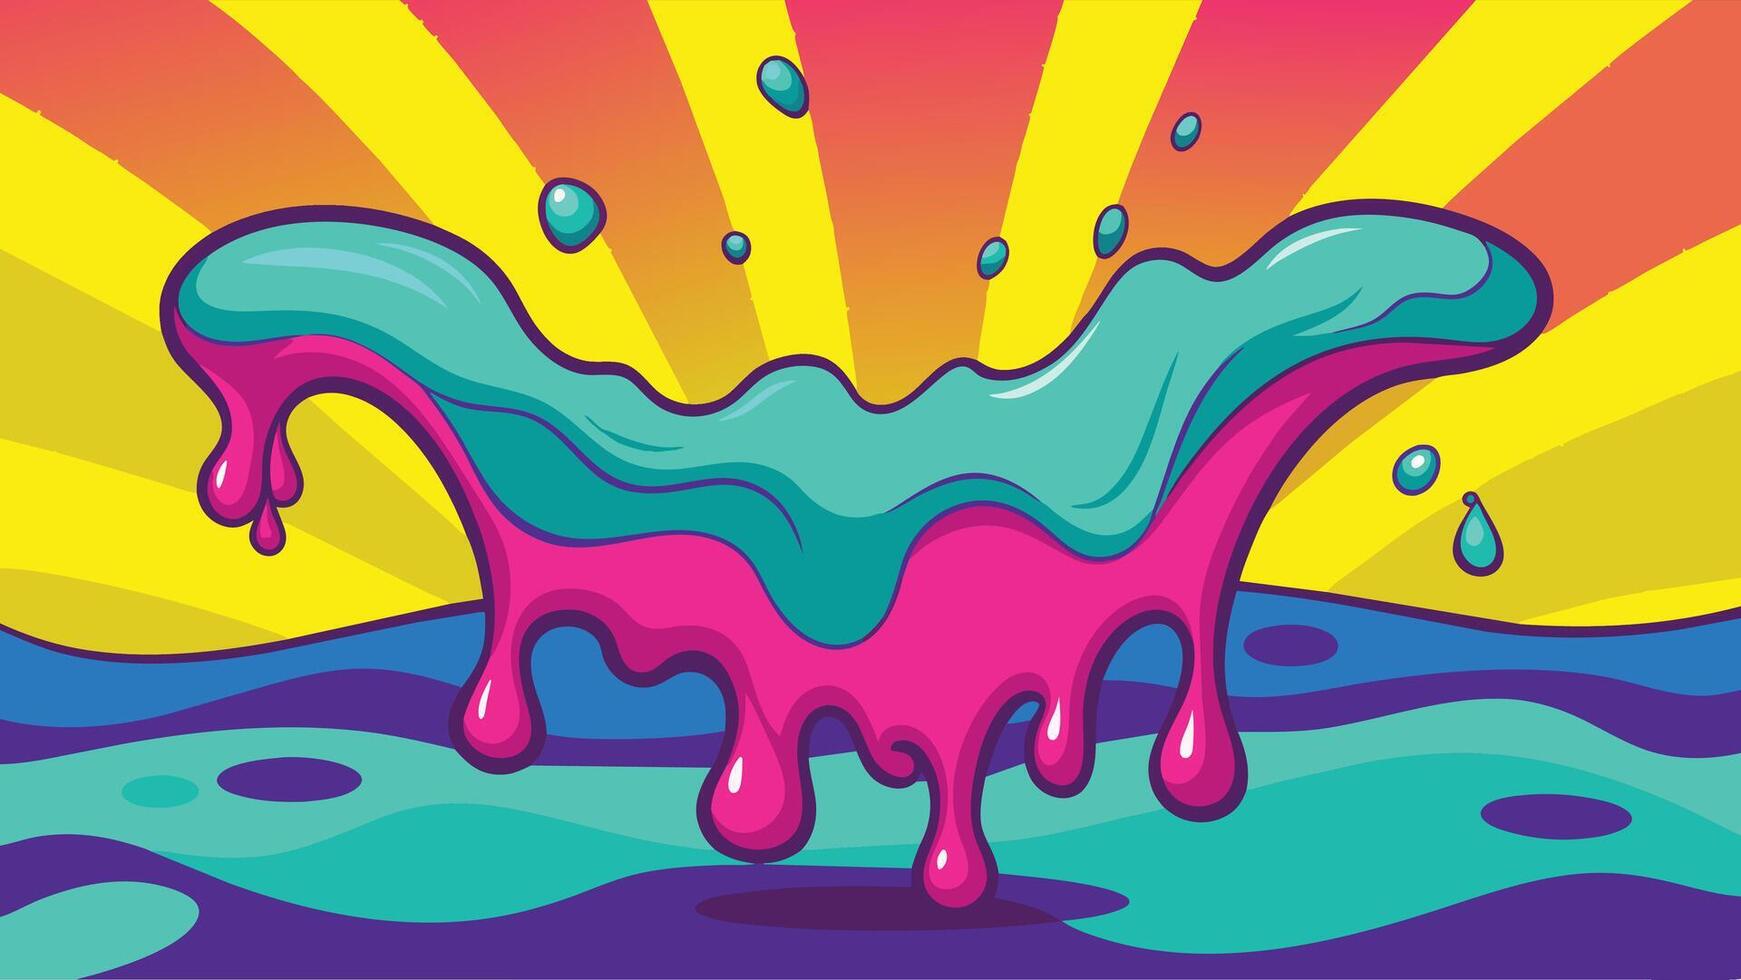 Illustration of a Splash of Colored Liquid on a Bright Background vector